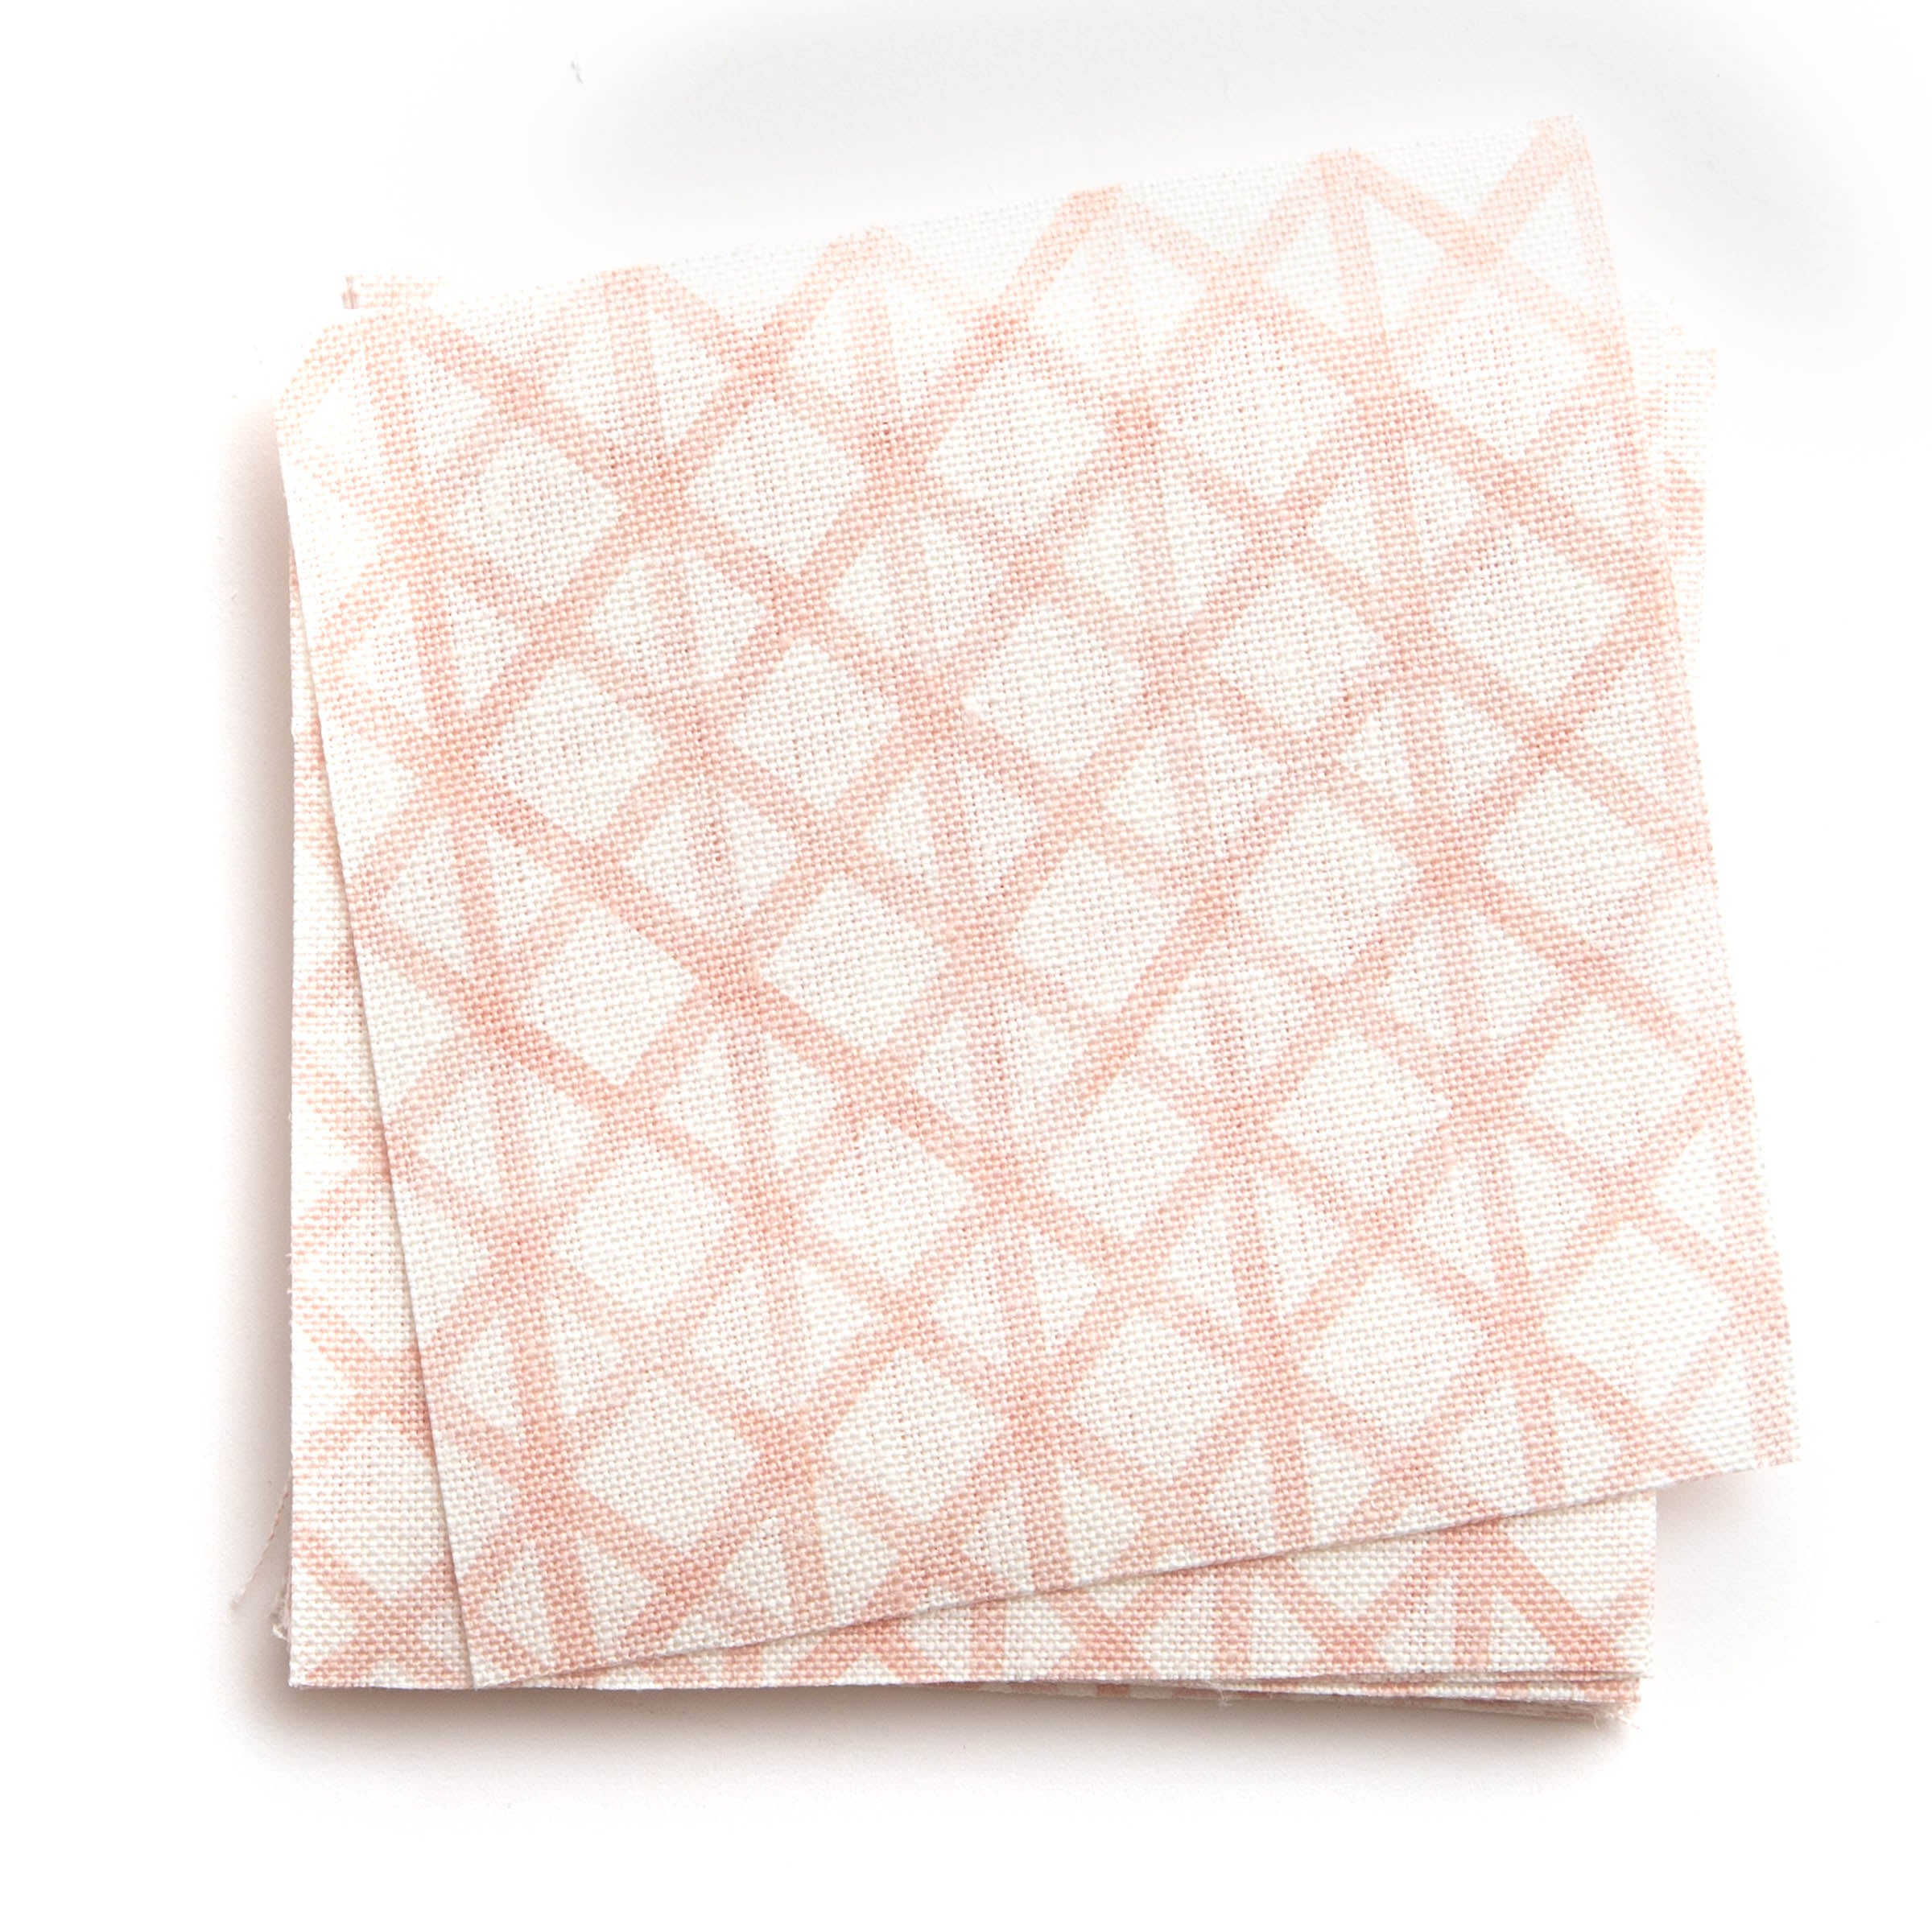 A stack of fabric swatches in an intricate striped grid pattern in light pink on a white field.